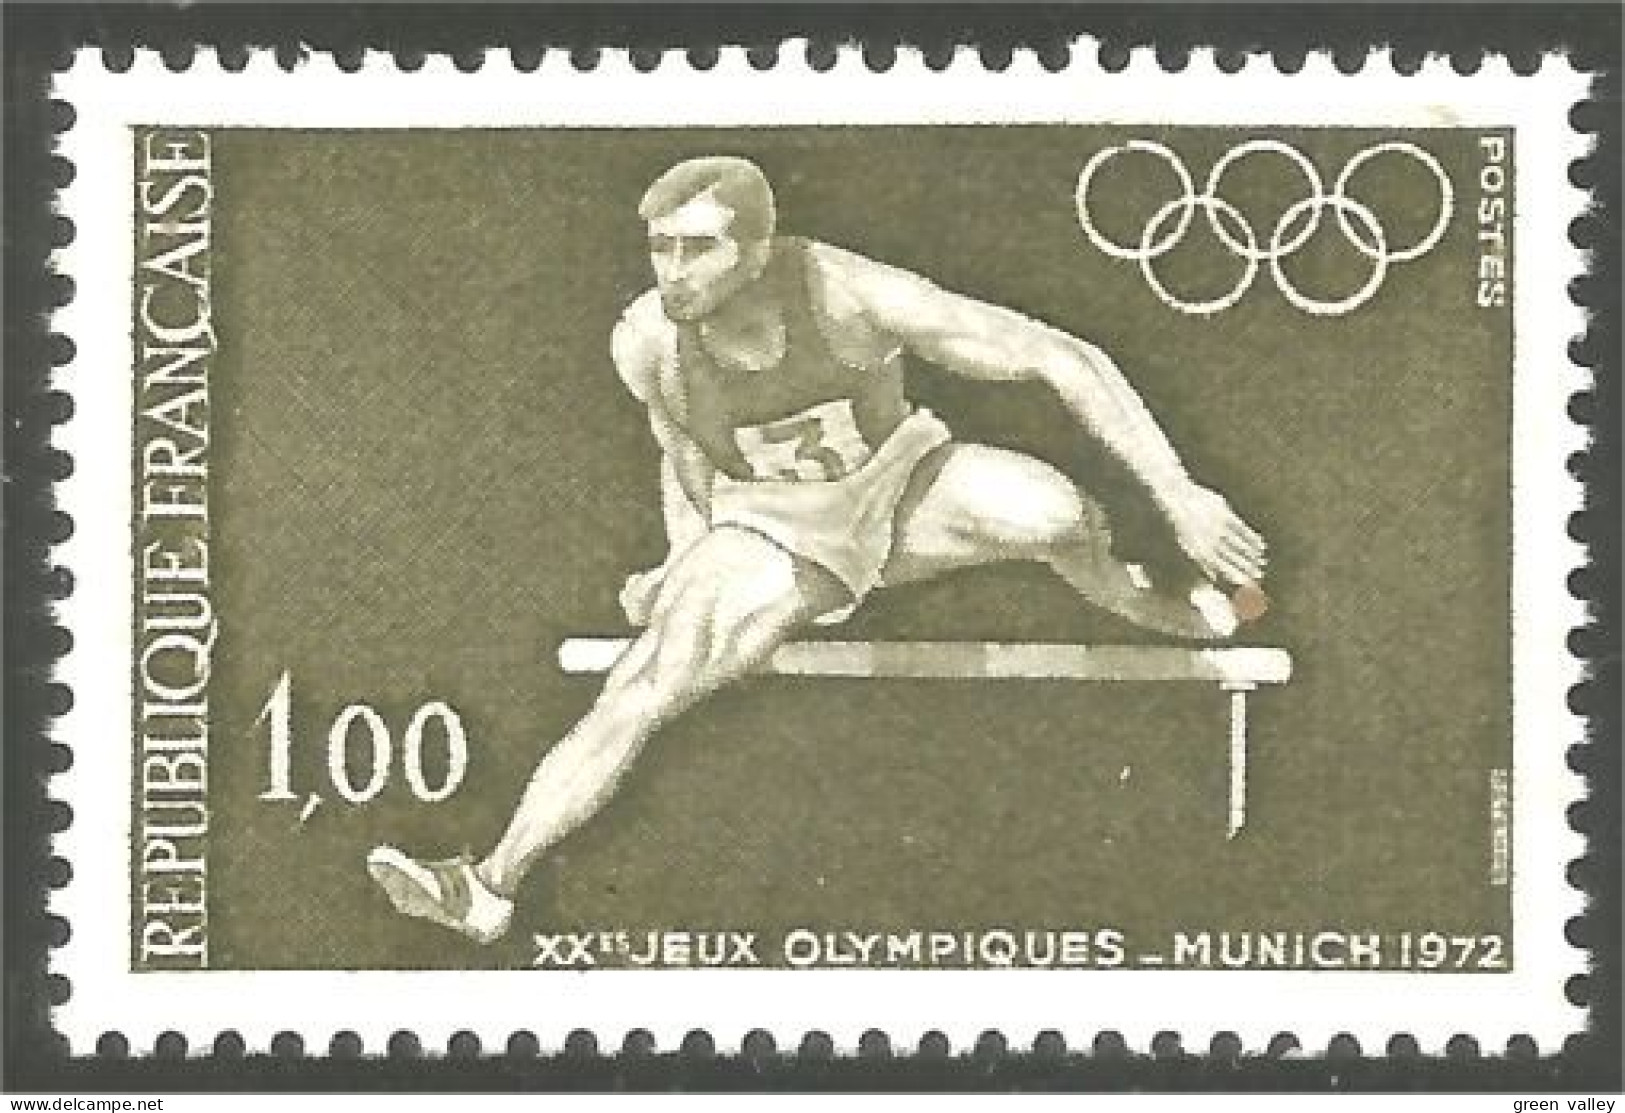 347 France Yv 1722 Olympiques Olympics Hurdles Running Course Haies MNH ** Neuf SC (1722-1b) - Sommer 1972: München